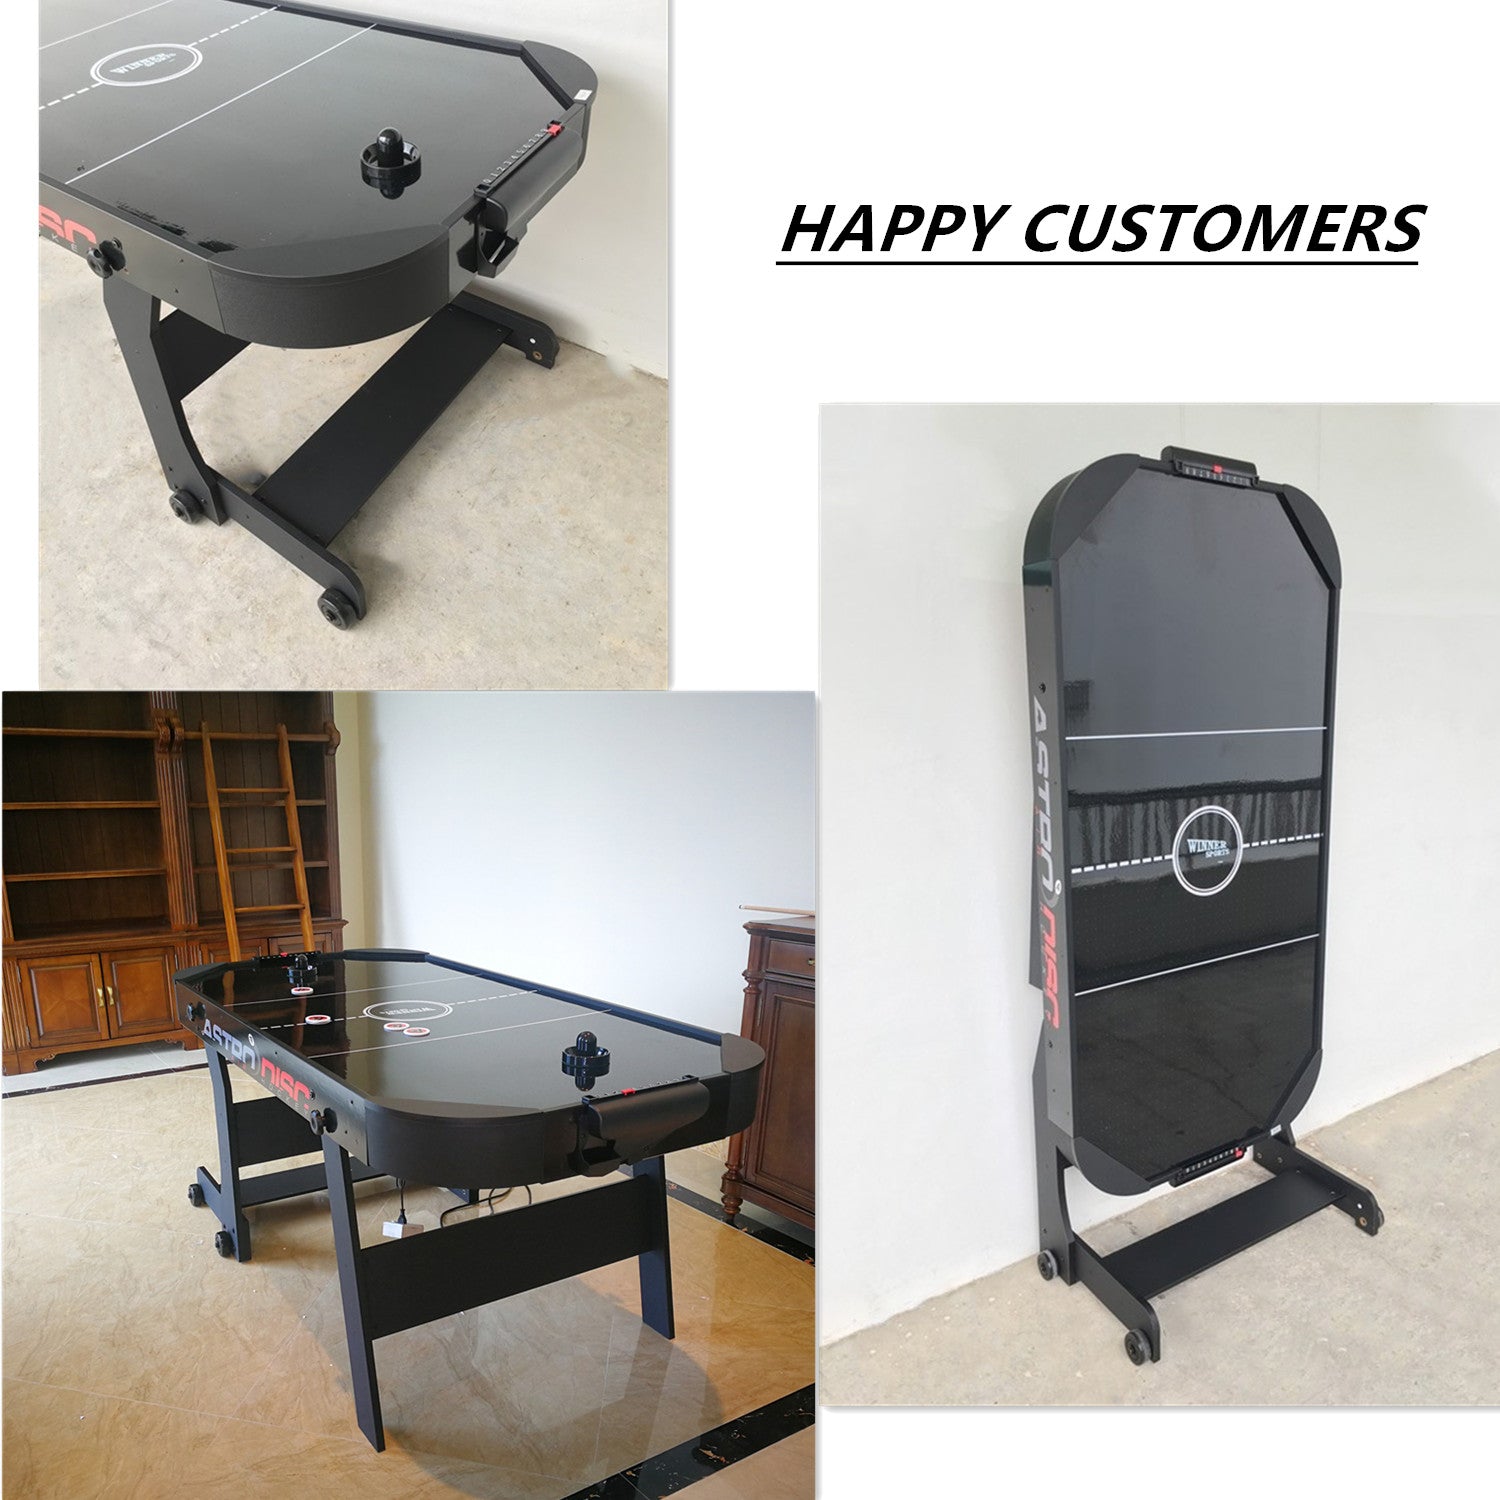 6FT Foldable Air Hockey Table With Wheels